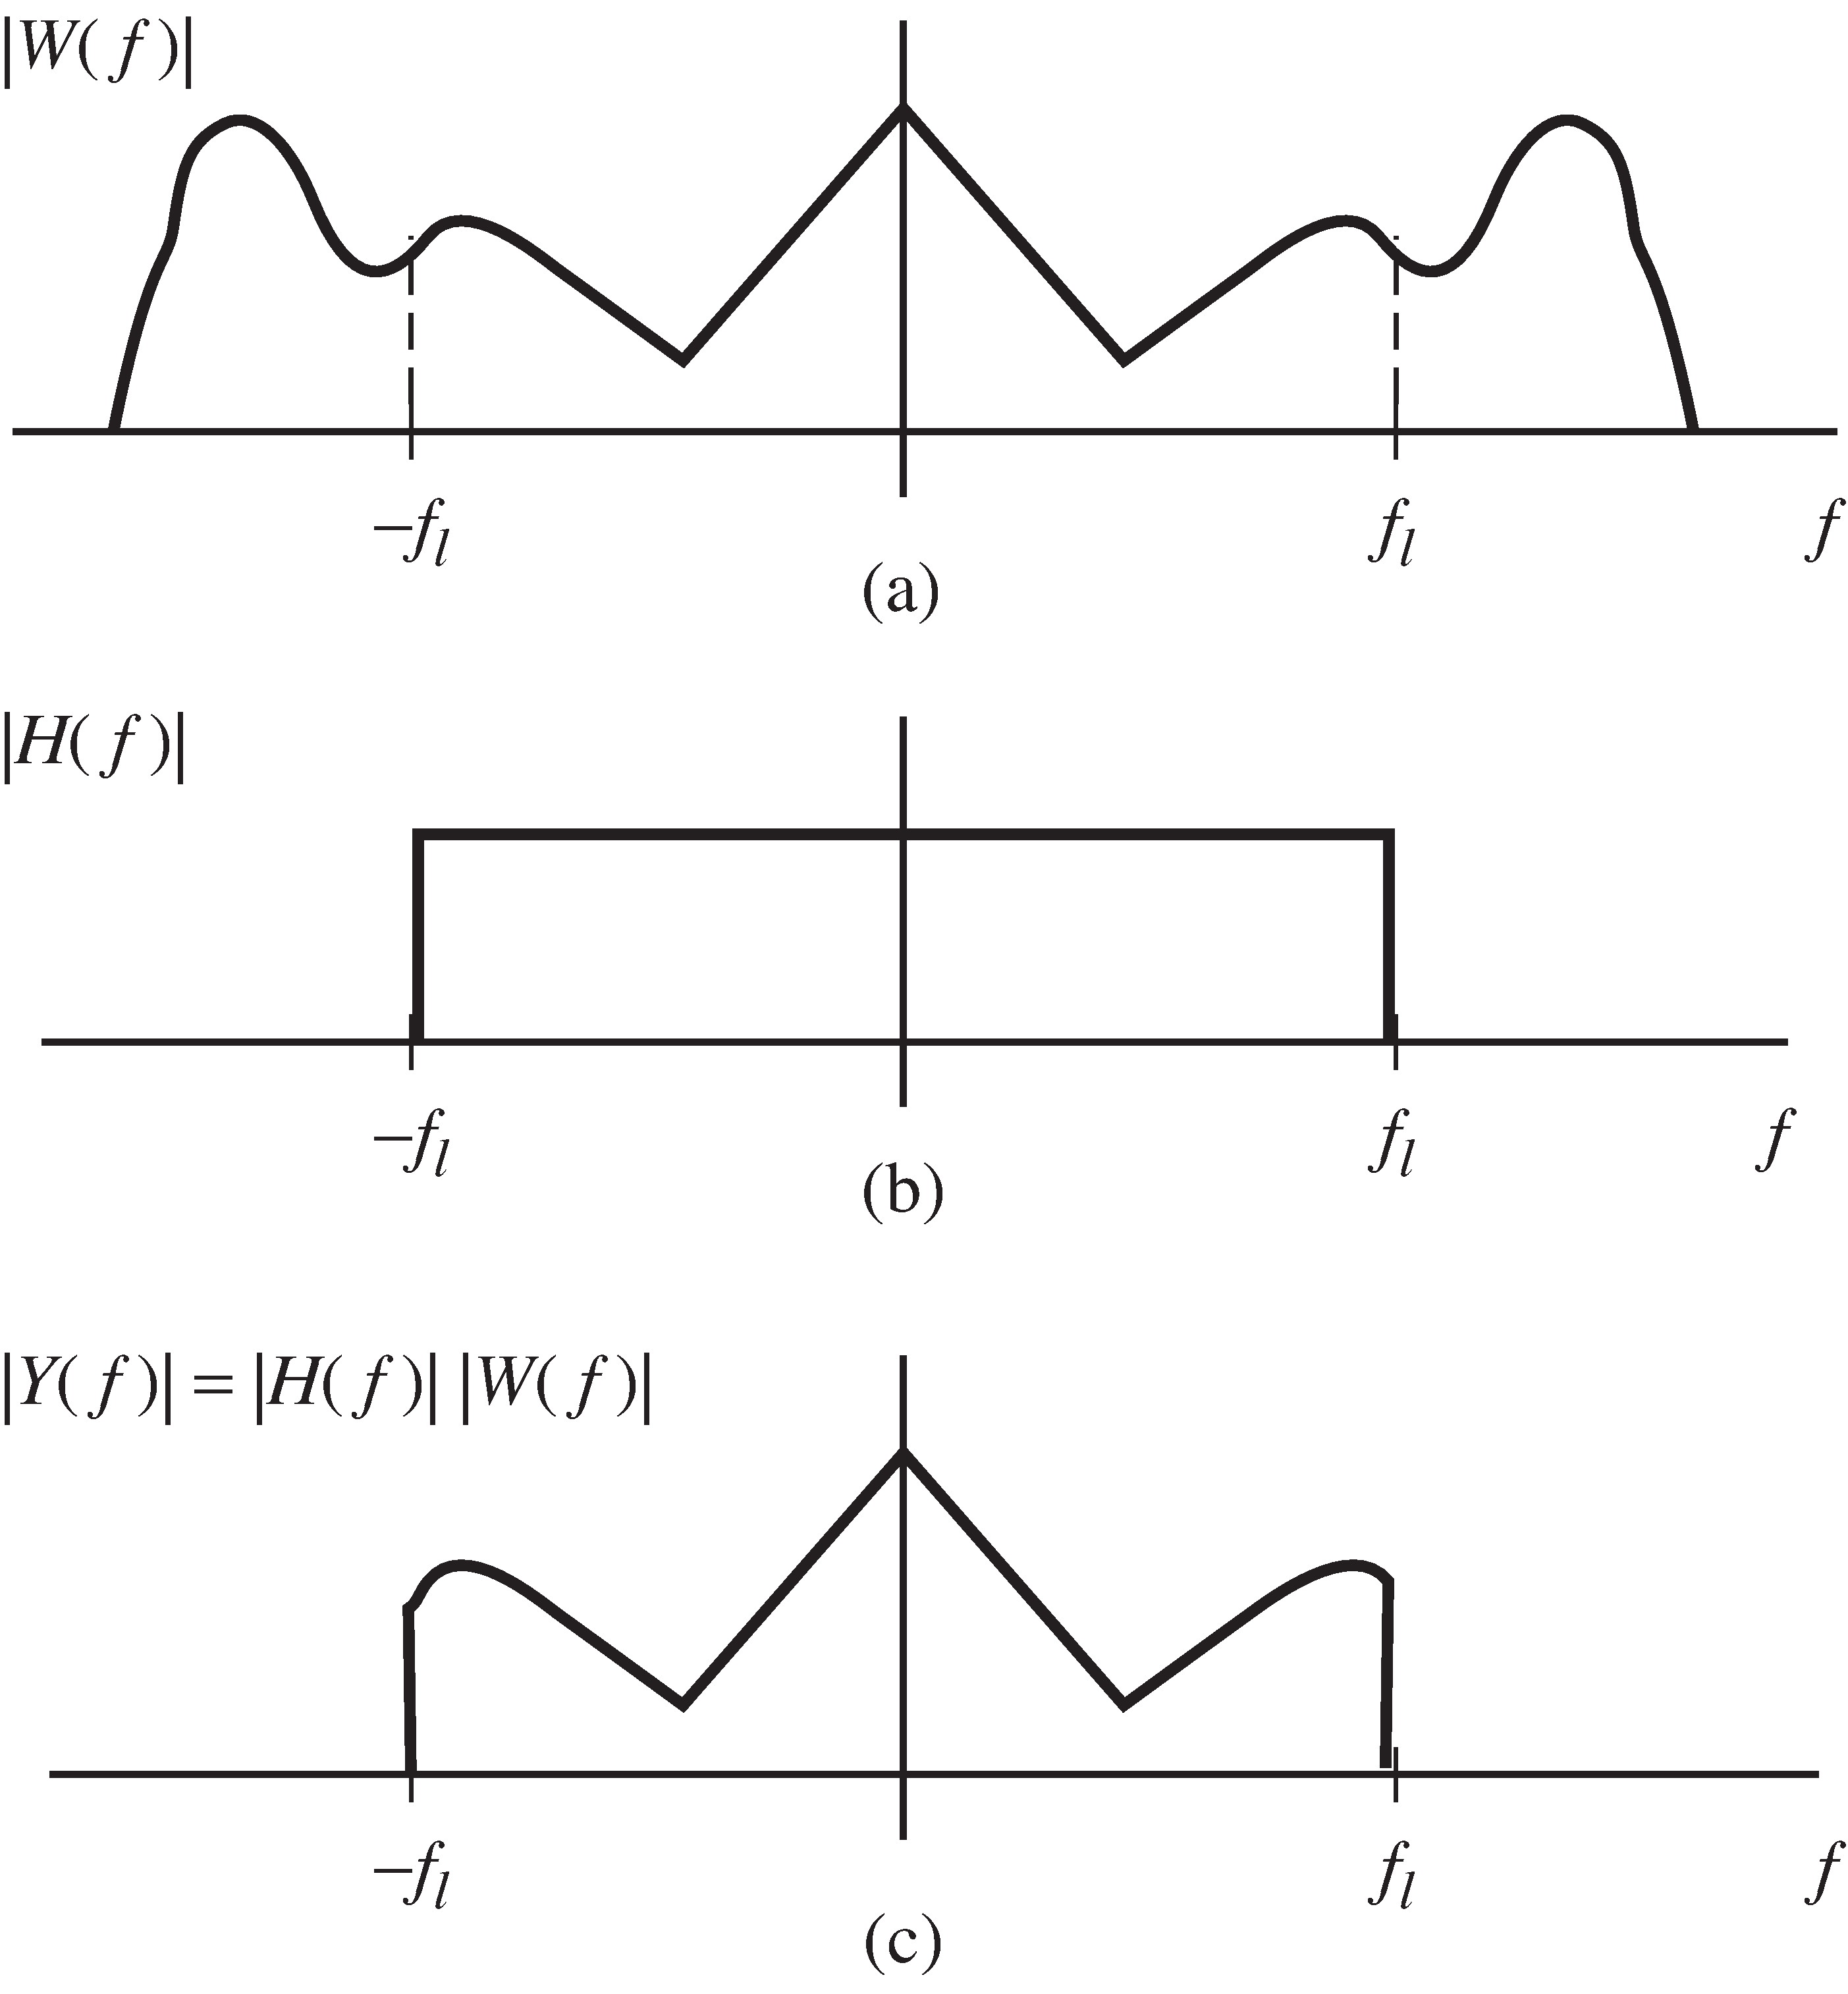 Action of a low pass filter: (a) shows the magnitude spectrum of the message which is input into an ideal low pass filter with frequency response (b); (c) shows the point-by-point multiplication of (a) and (b), which gives the spectrum of the output of the filter.